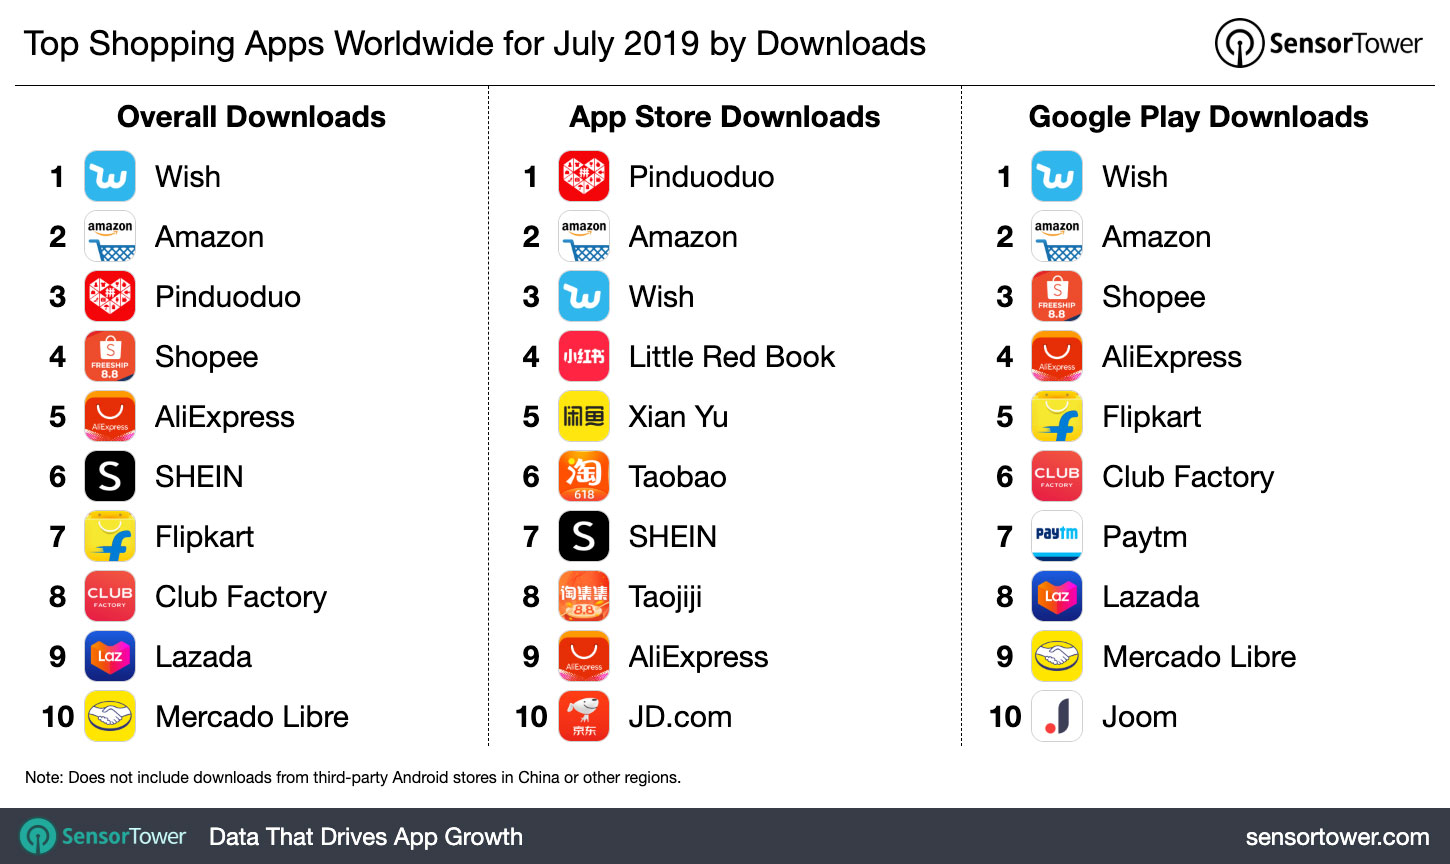 Top Shopping Apps Worldwide for July 2019 by Downloads